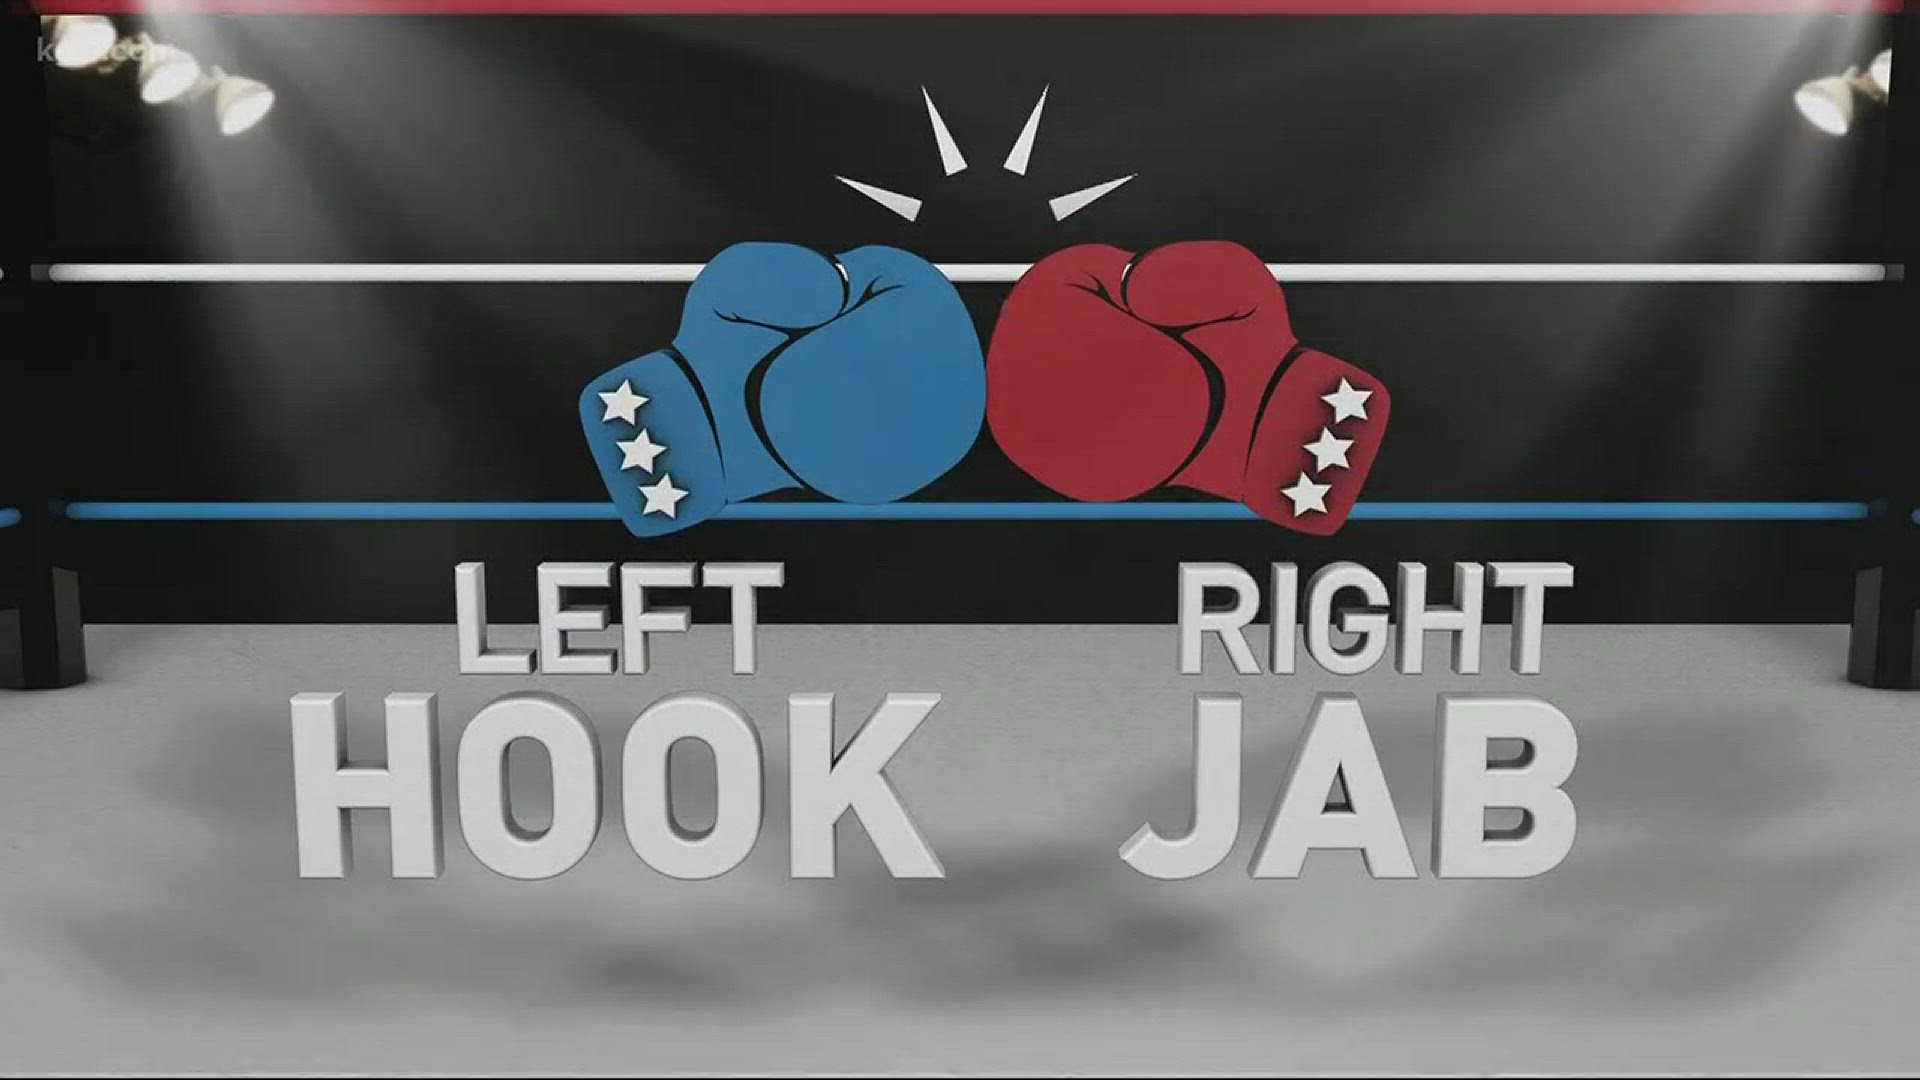 Was Jesus a liberal or conservative? The debate on Left Hook Right Jab.